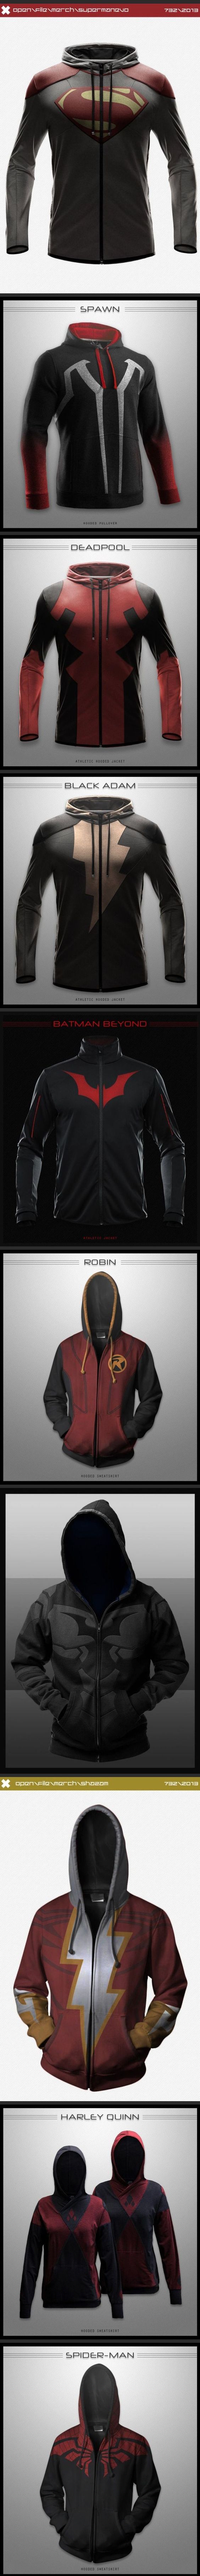 The coolest hoodies you'd love to own. I need the Deadpool and Spider-Man hoodies.